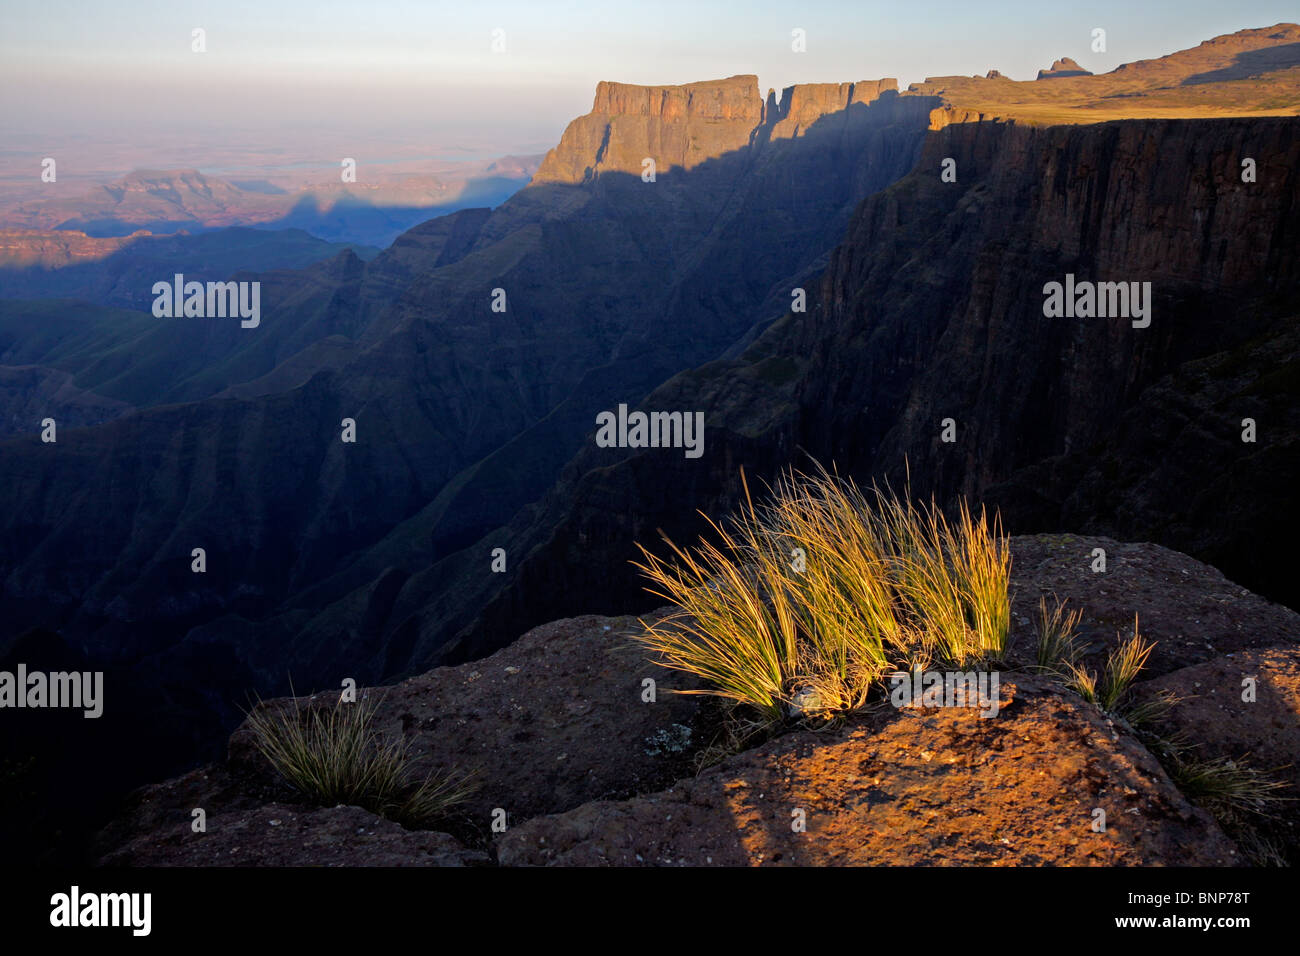 View of the high peaks of the Drakensberg mountains, Royal Natal National Park, South Africa Stock Photo